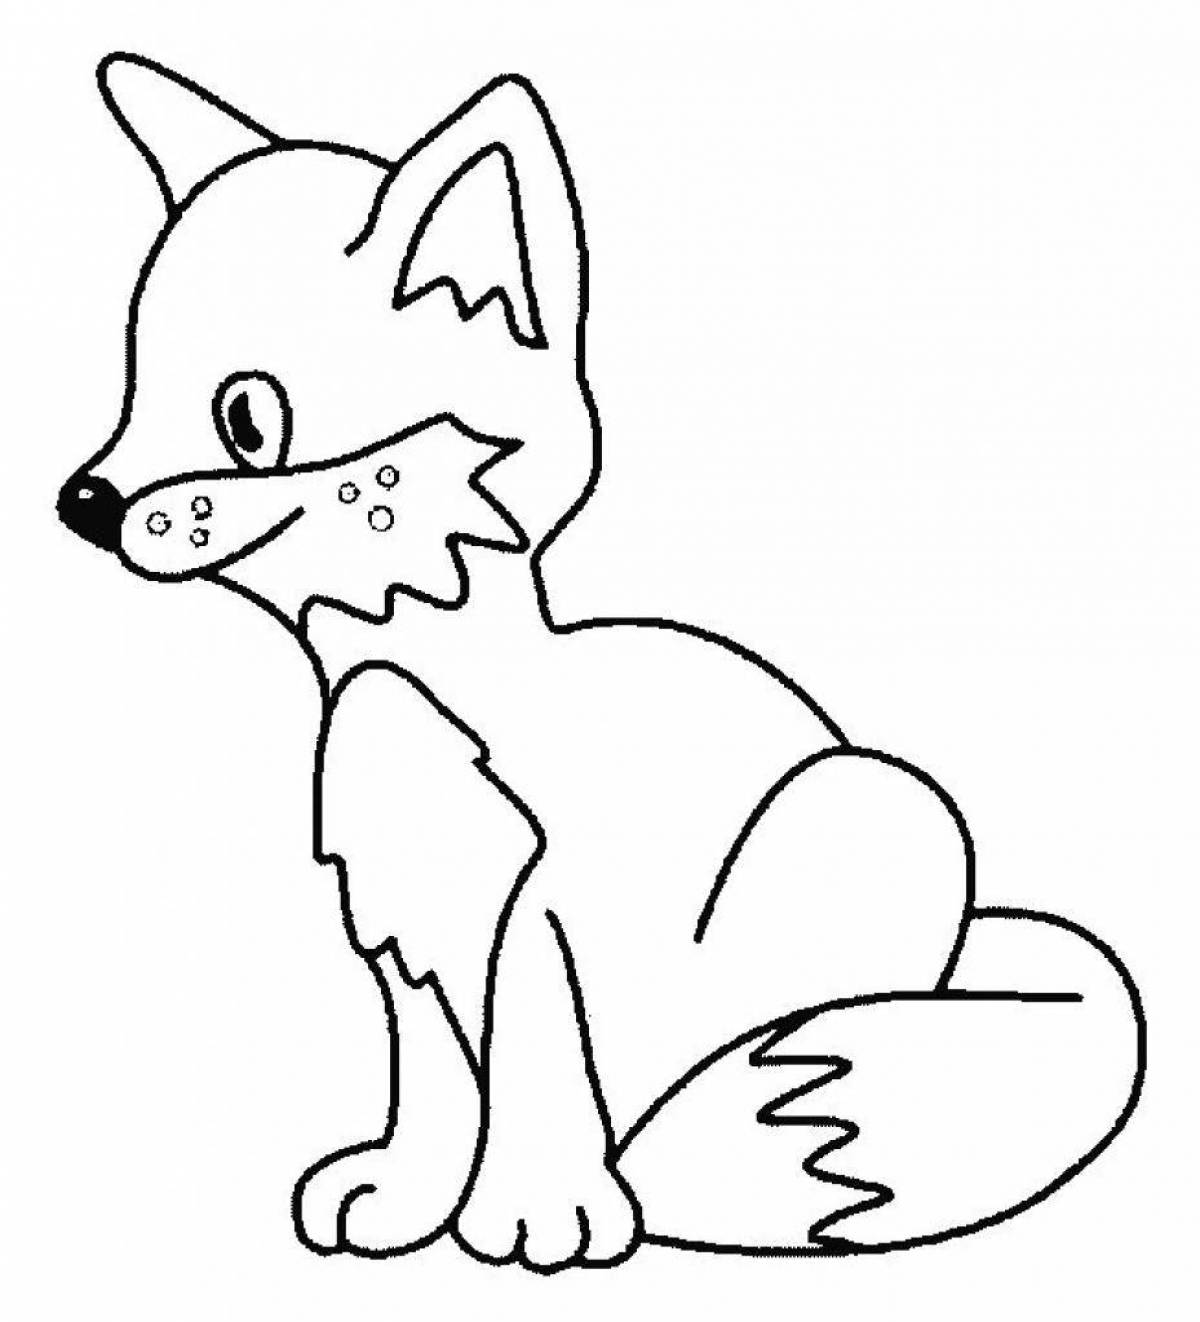 Shiny fox coloring book for kids